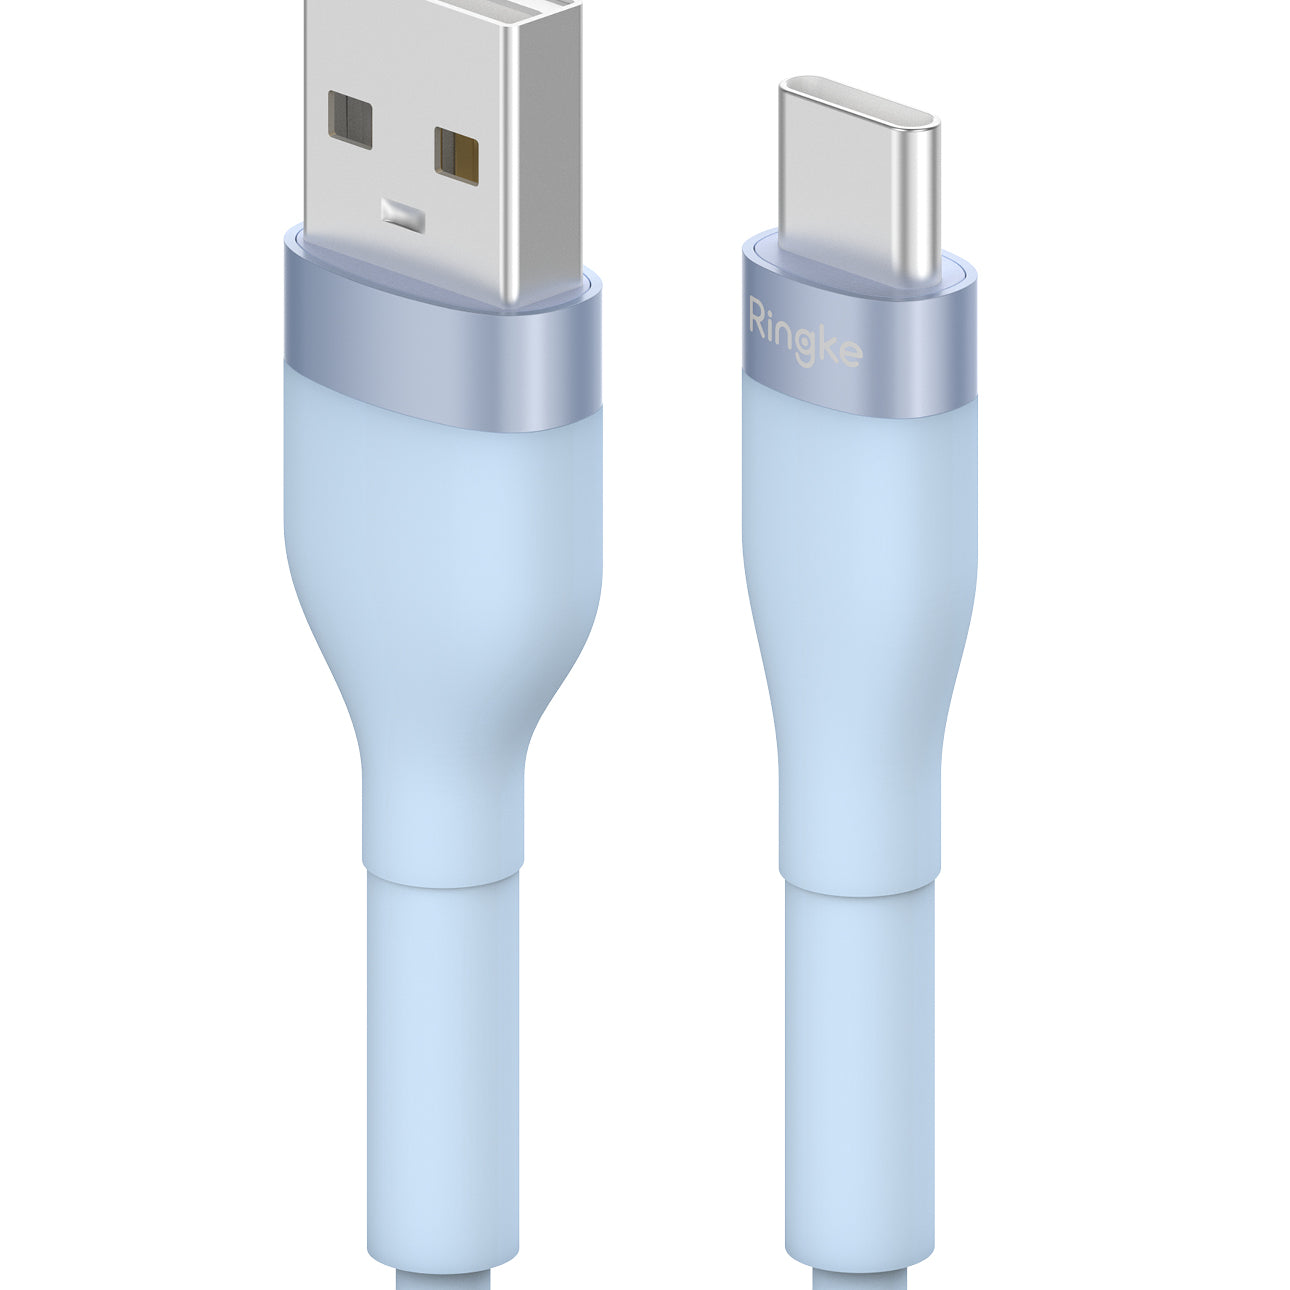 Ringke Fast Charging Pastel Cable - A Type-C Type